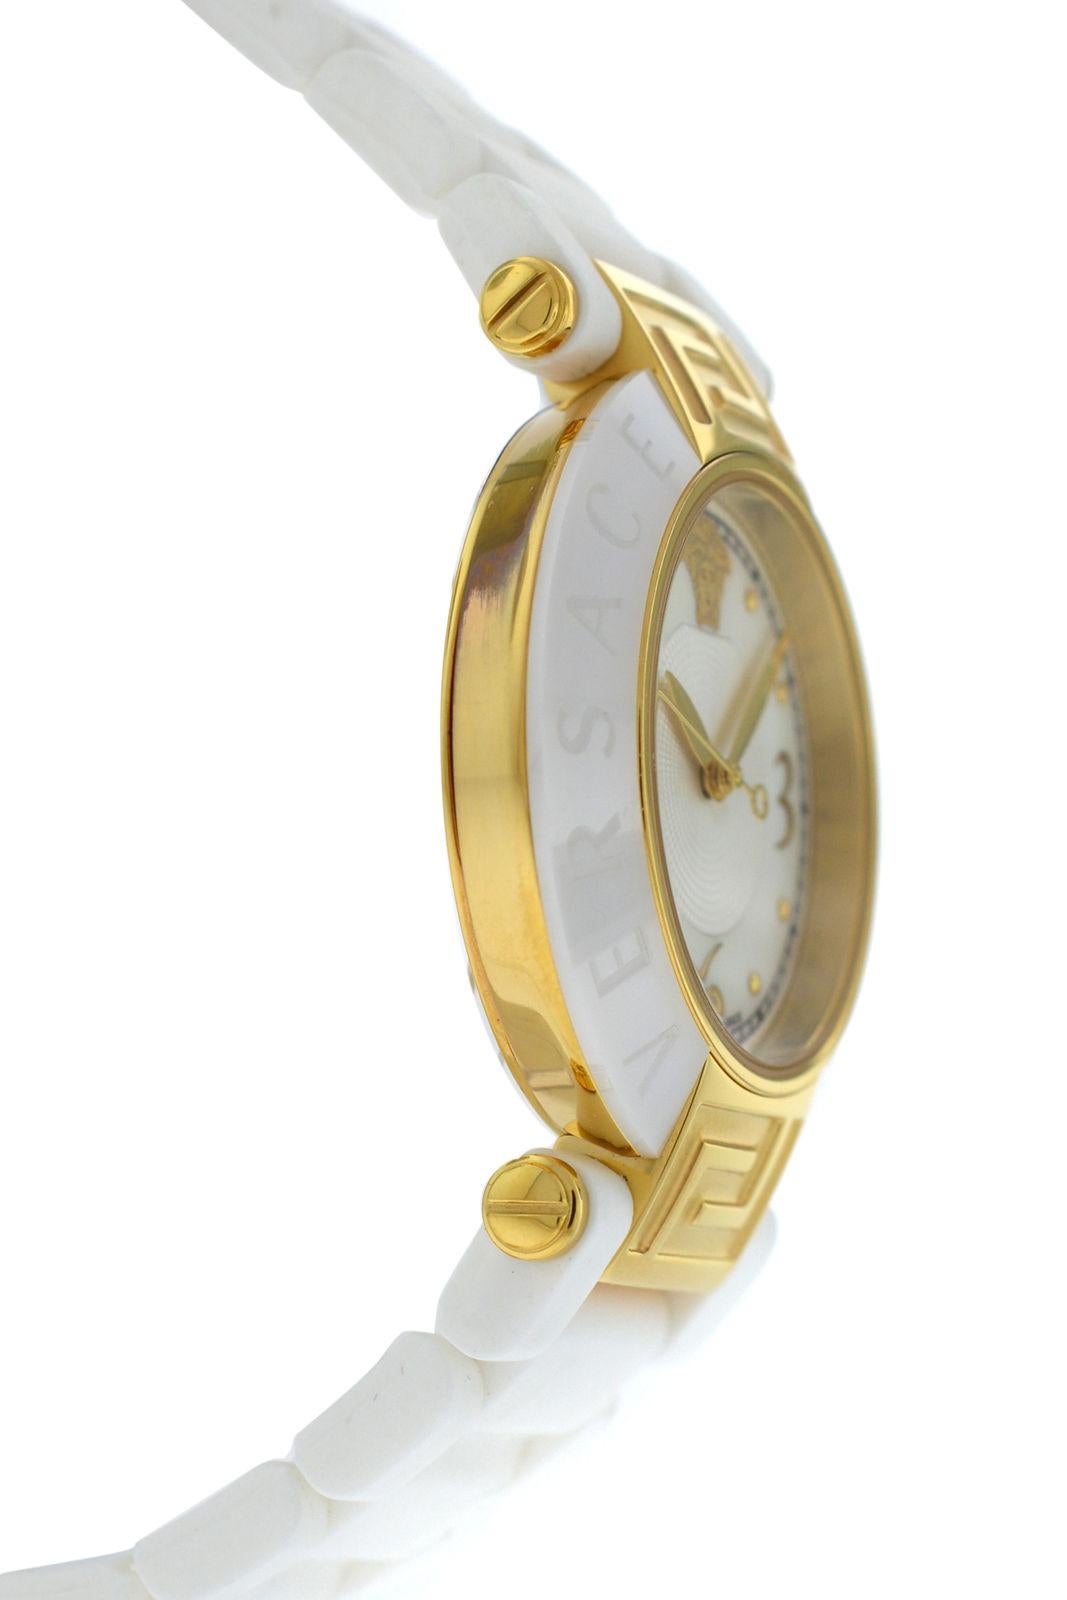 Modern New Versace Reve Ceramic Quartz Gold Tone Steel Mother of Pearl Watch For Sale